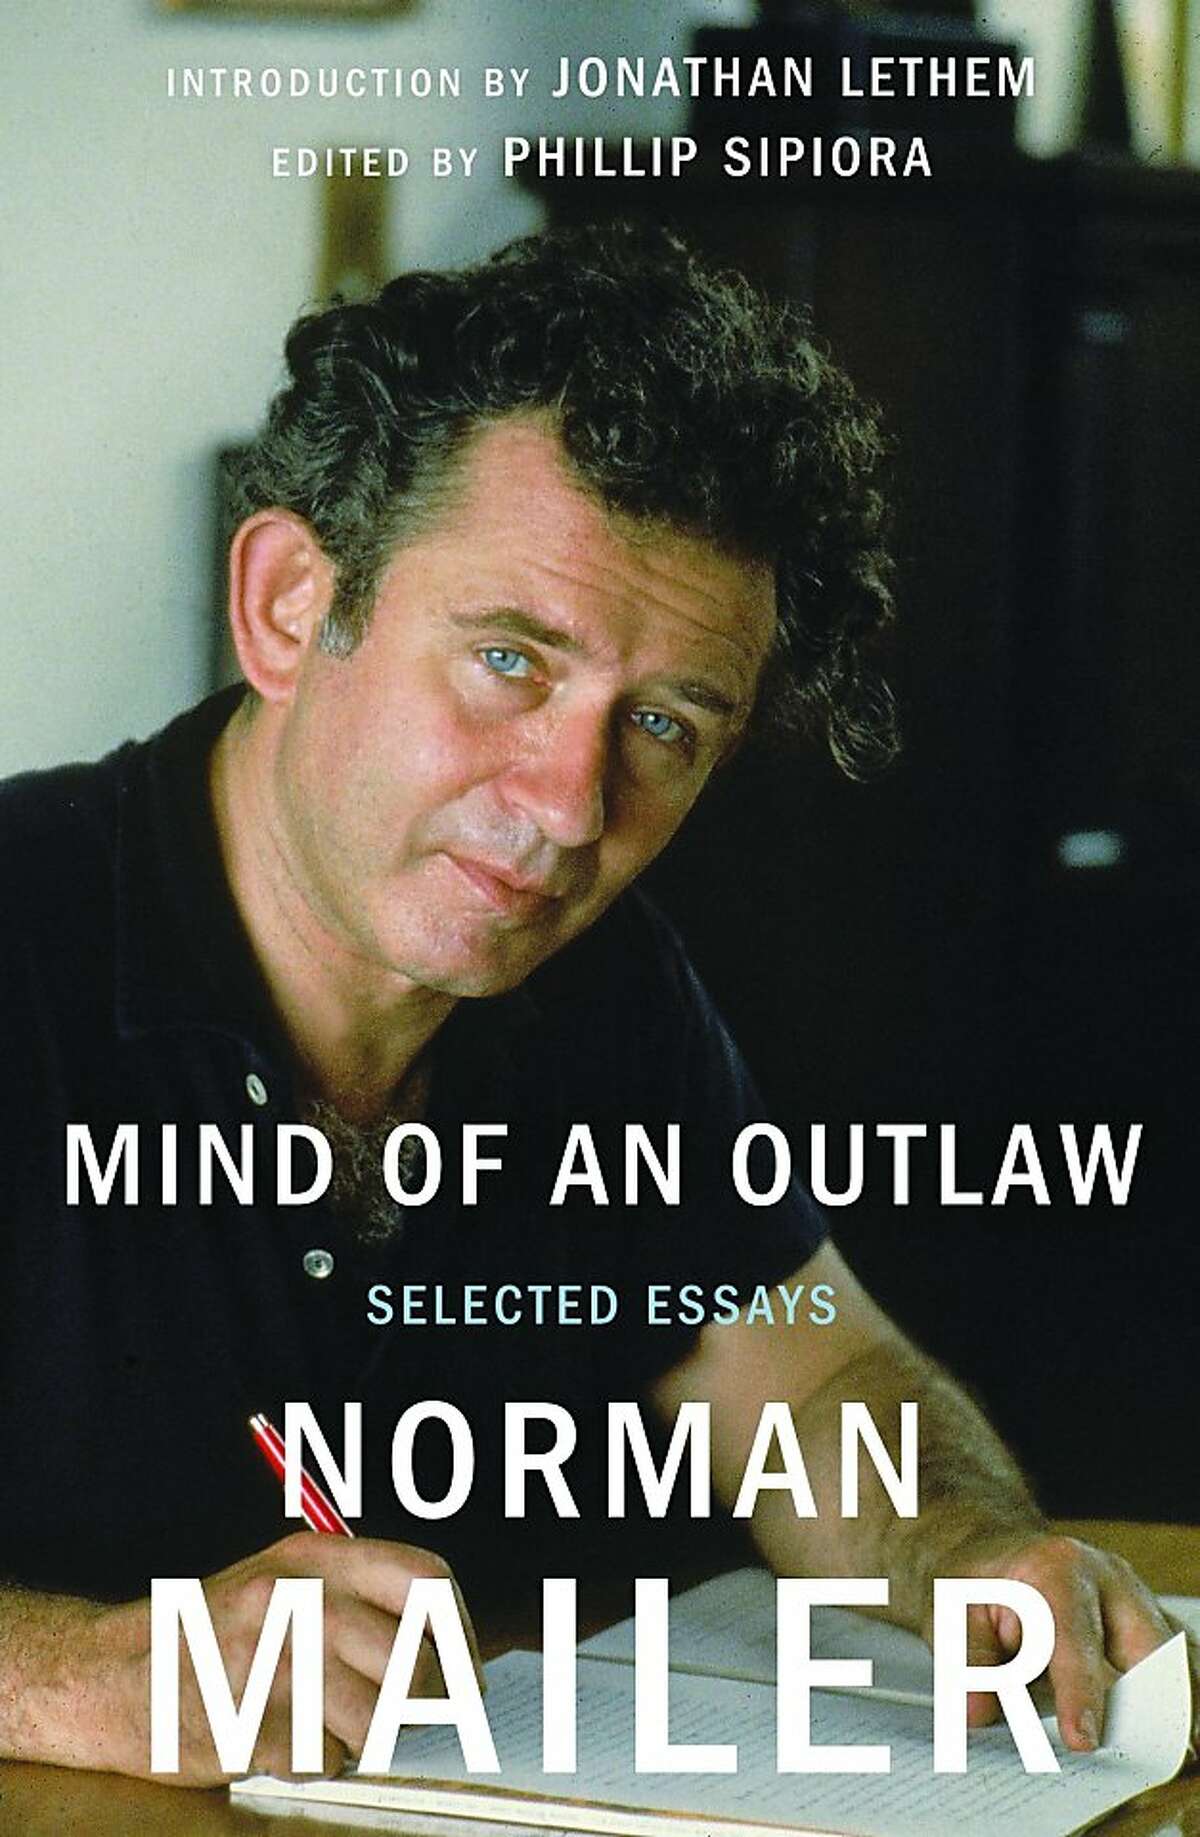 Mind of an Outlaw: Selected Essays, by Norman Mailer